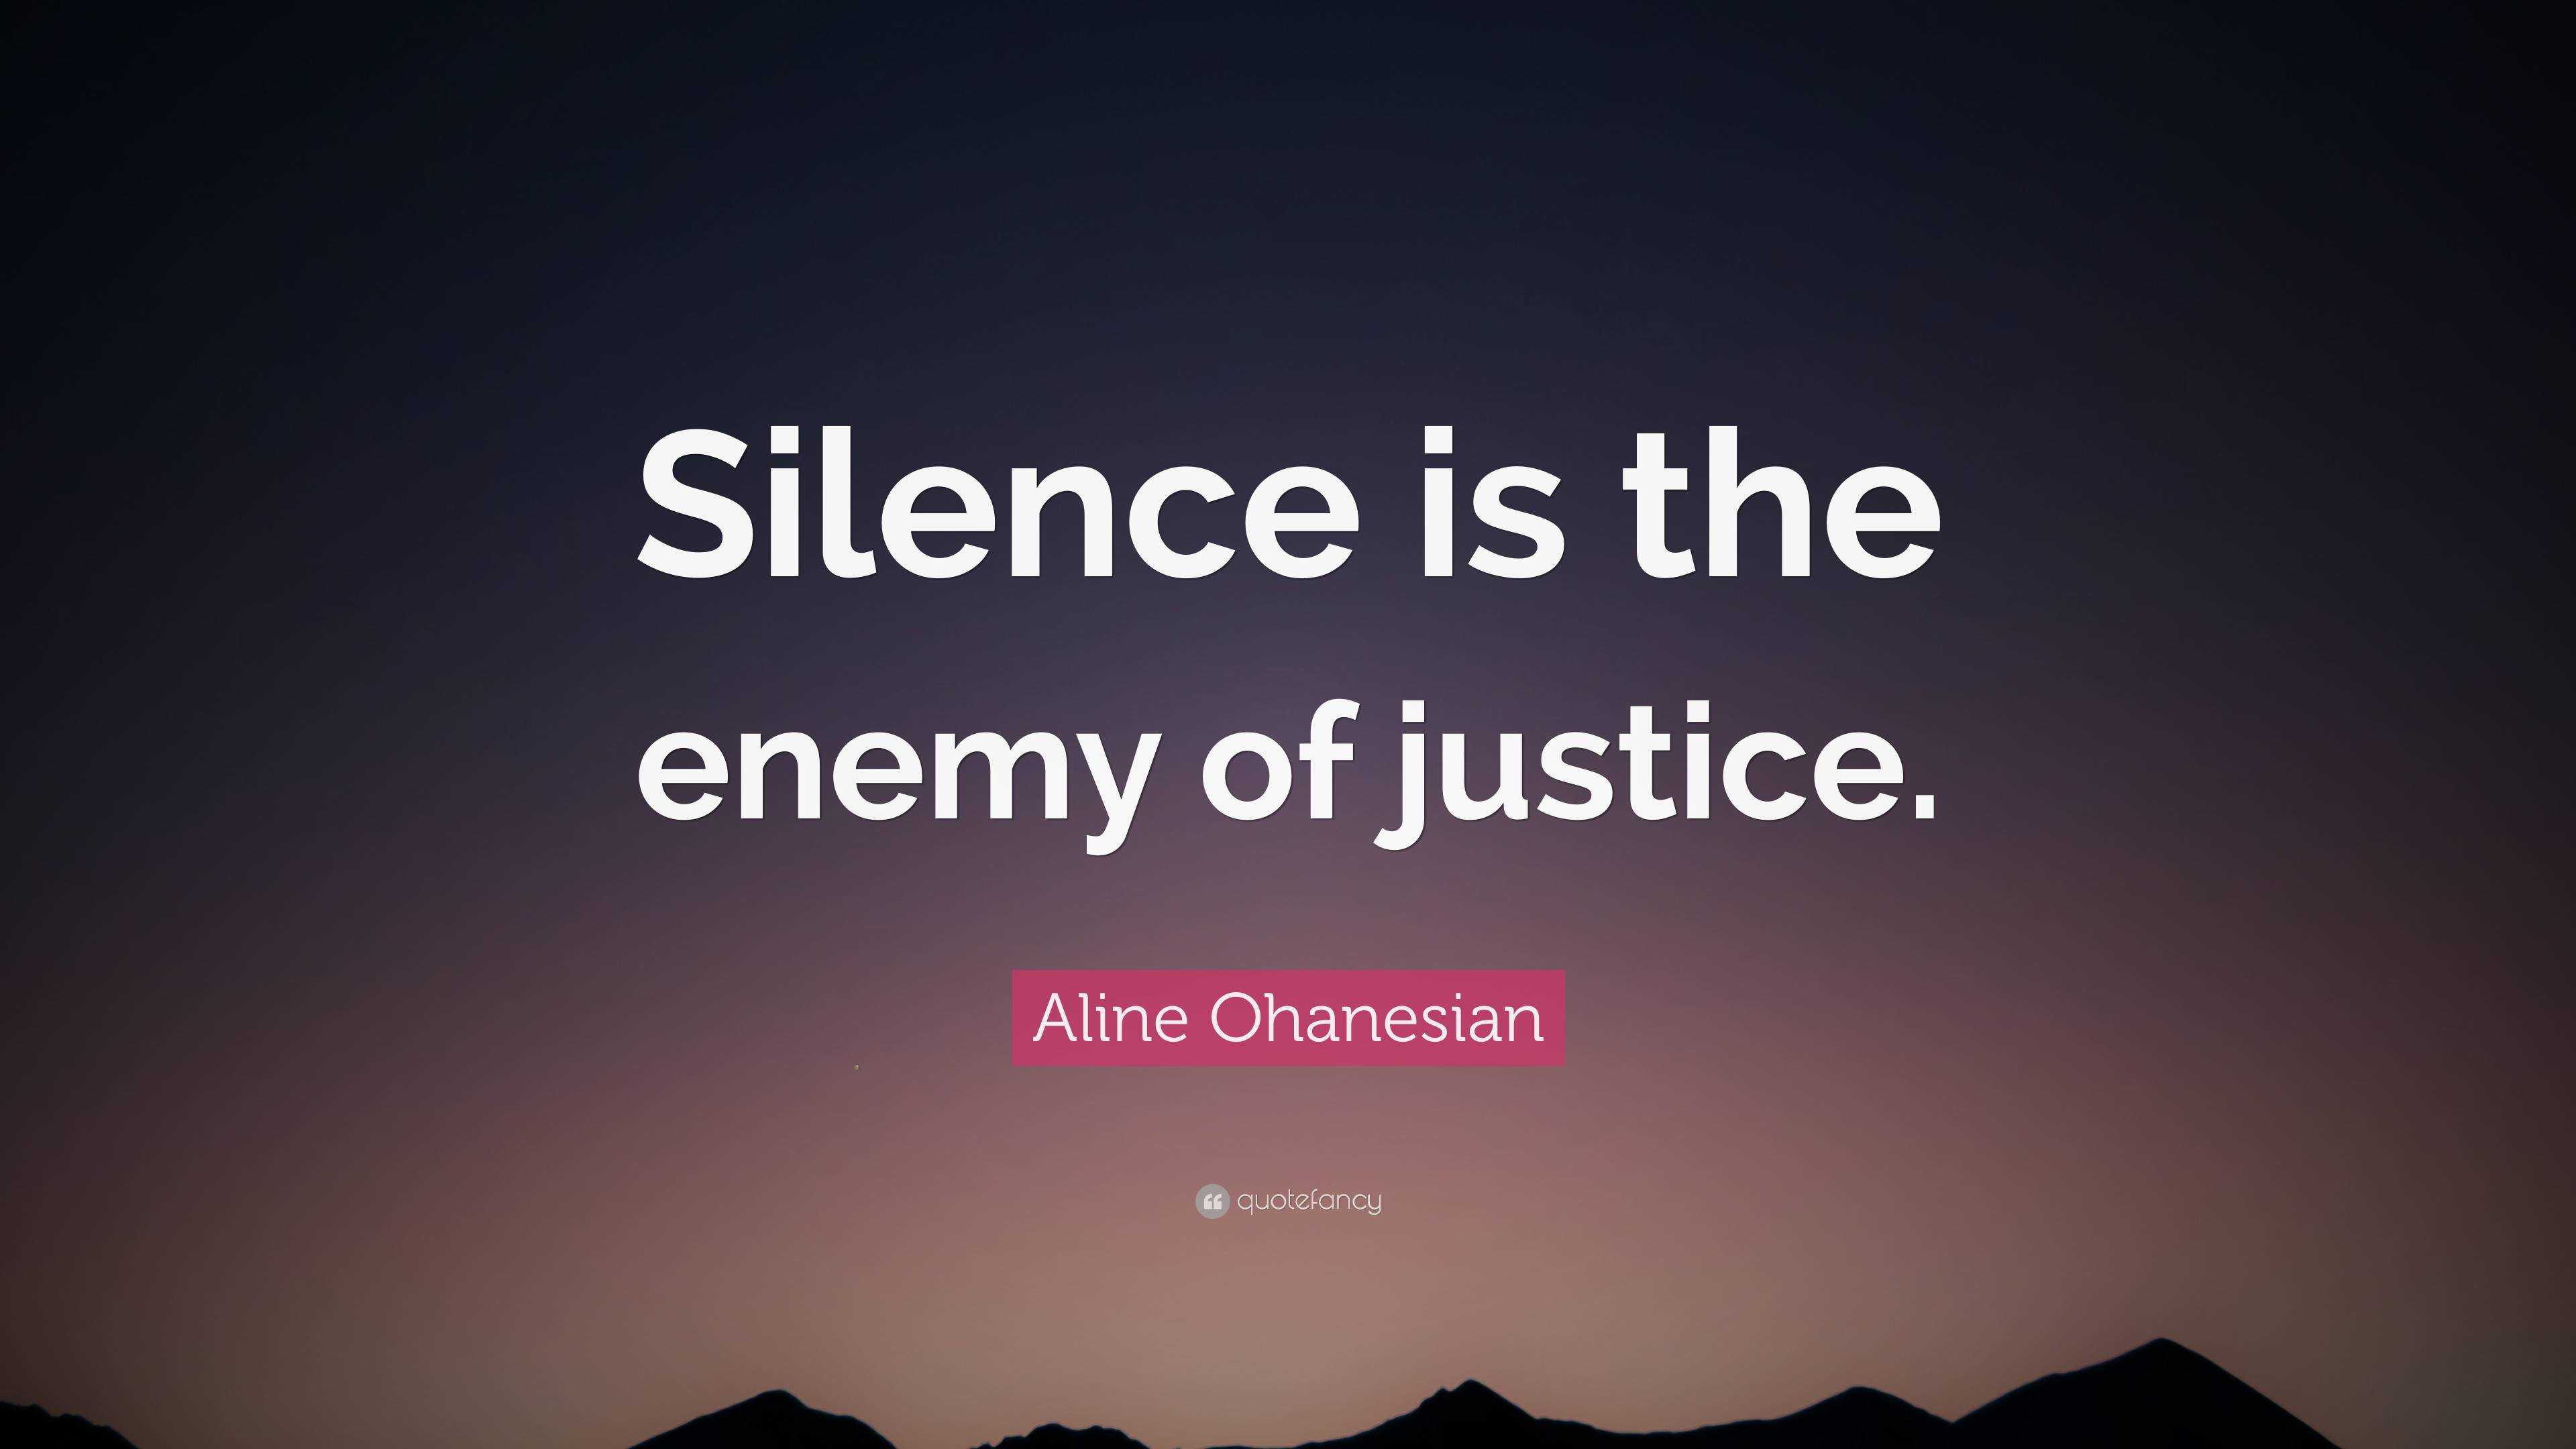 Aline Ohanesian Quote: “Silence is the enemy of justice.”